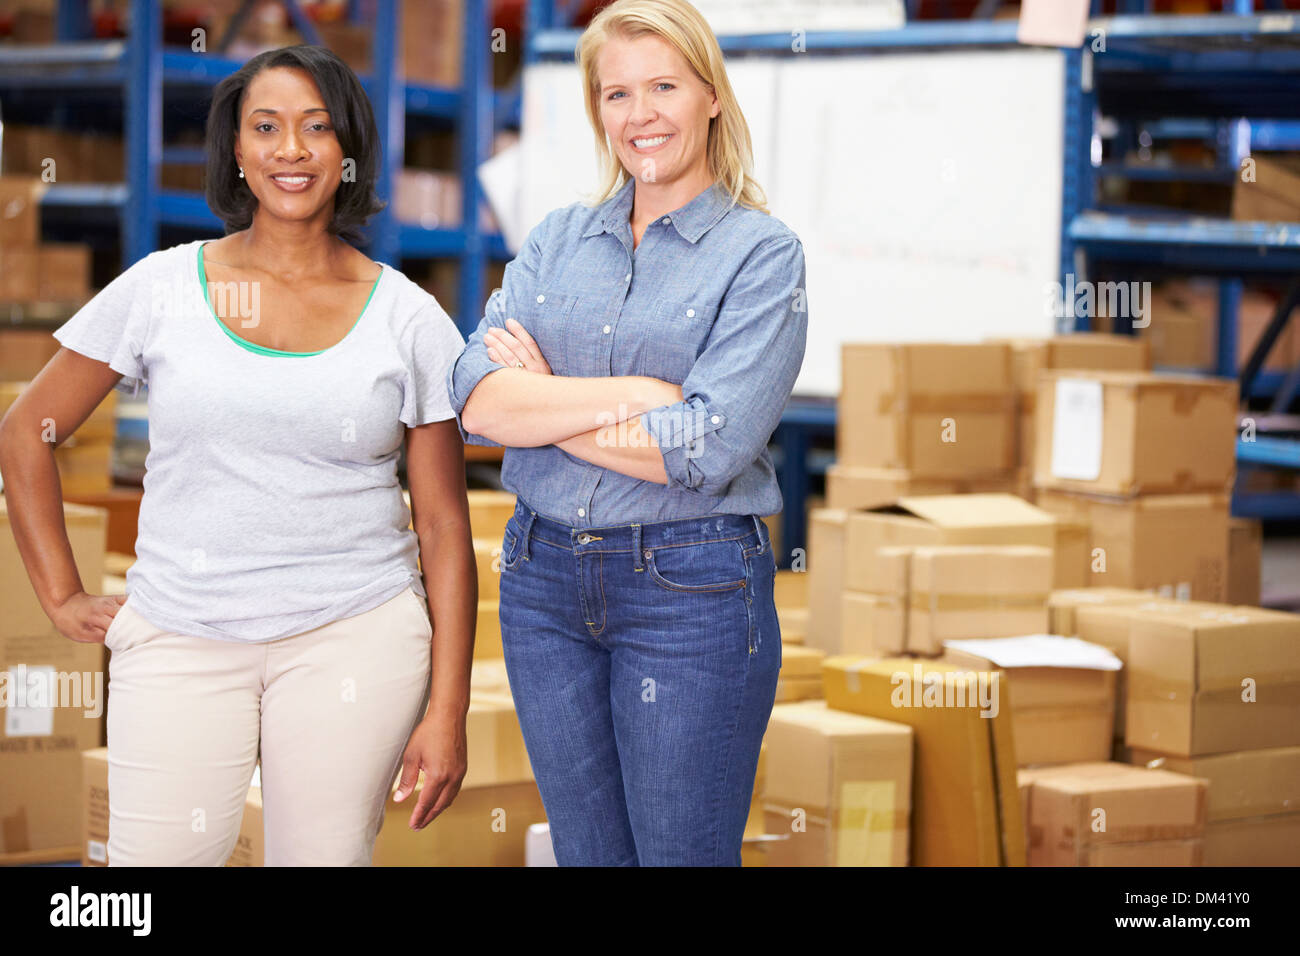 Portrait Of Workers In Distribution Warehouse Stock Photo